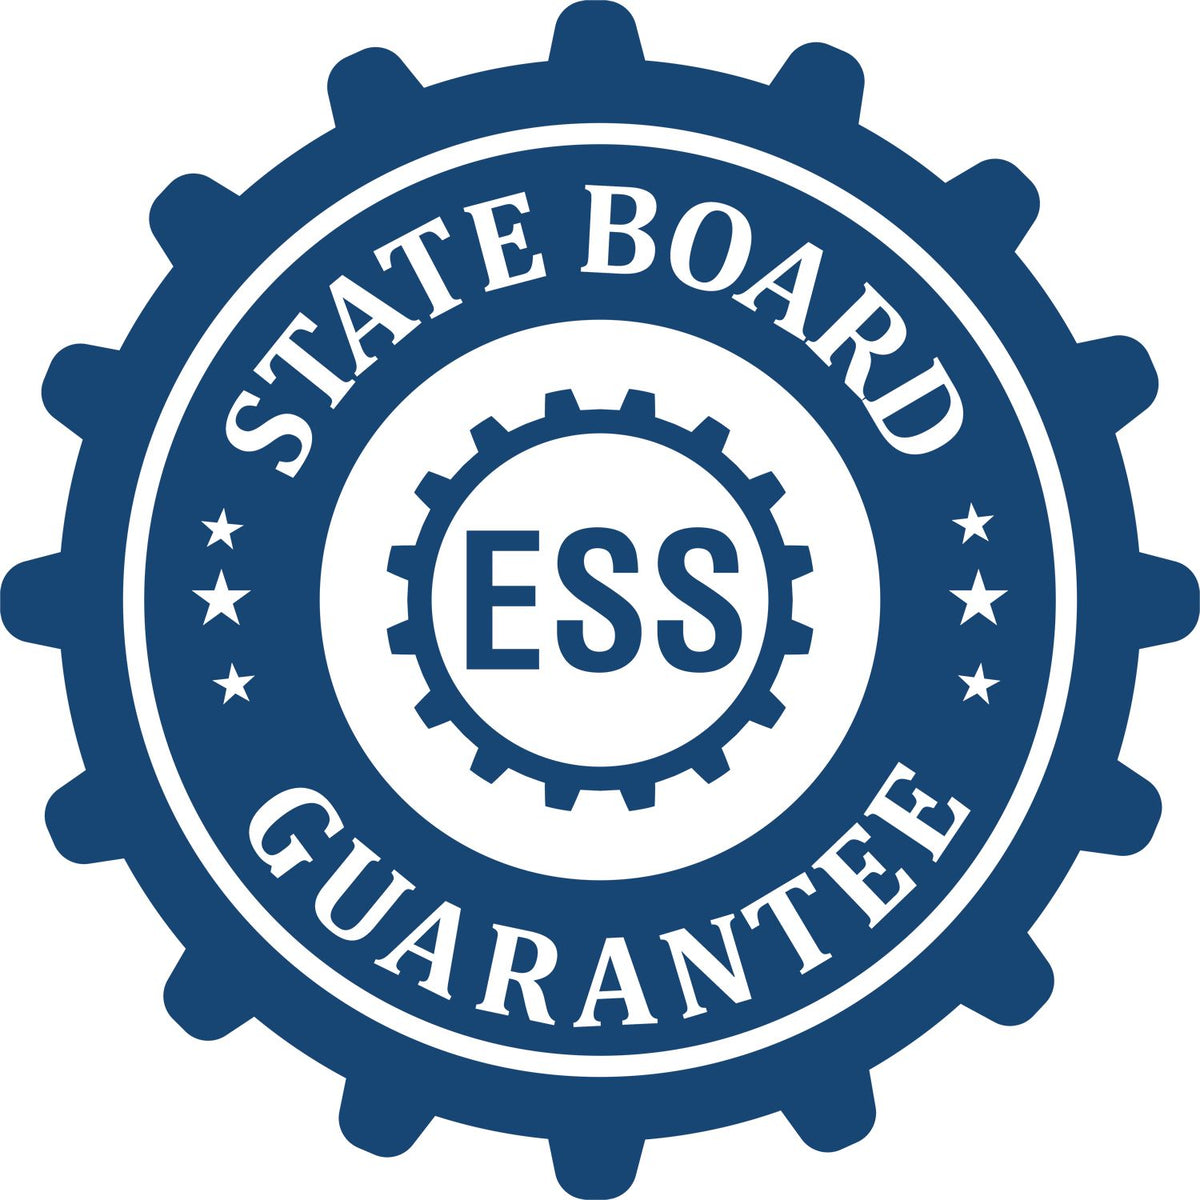 An emblem in a gear shape illustrating a state board guarantee for the Delaware Engineer Desk Seal product.